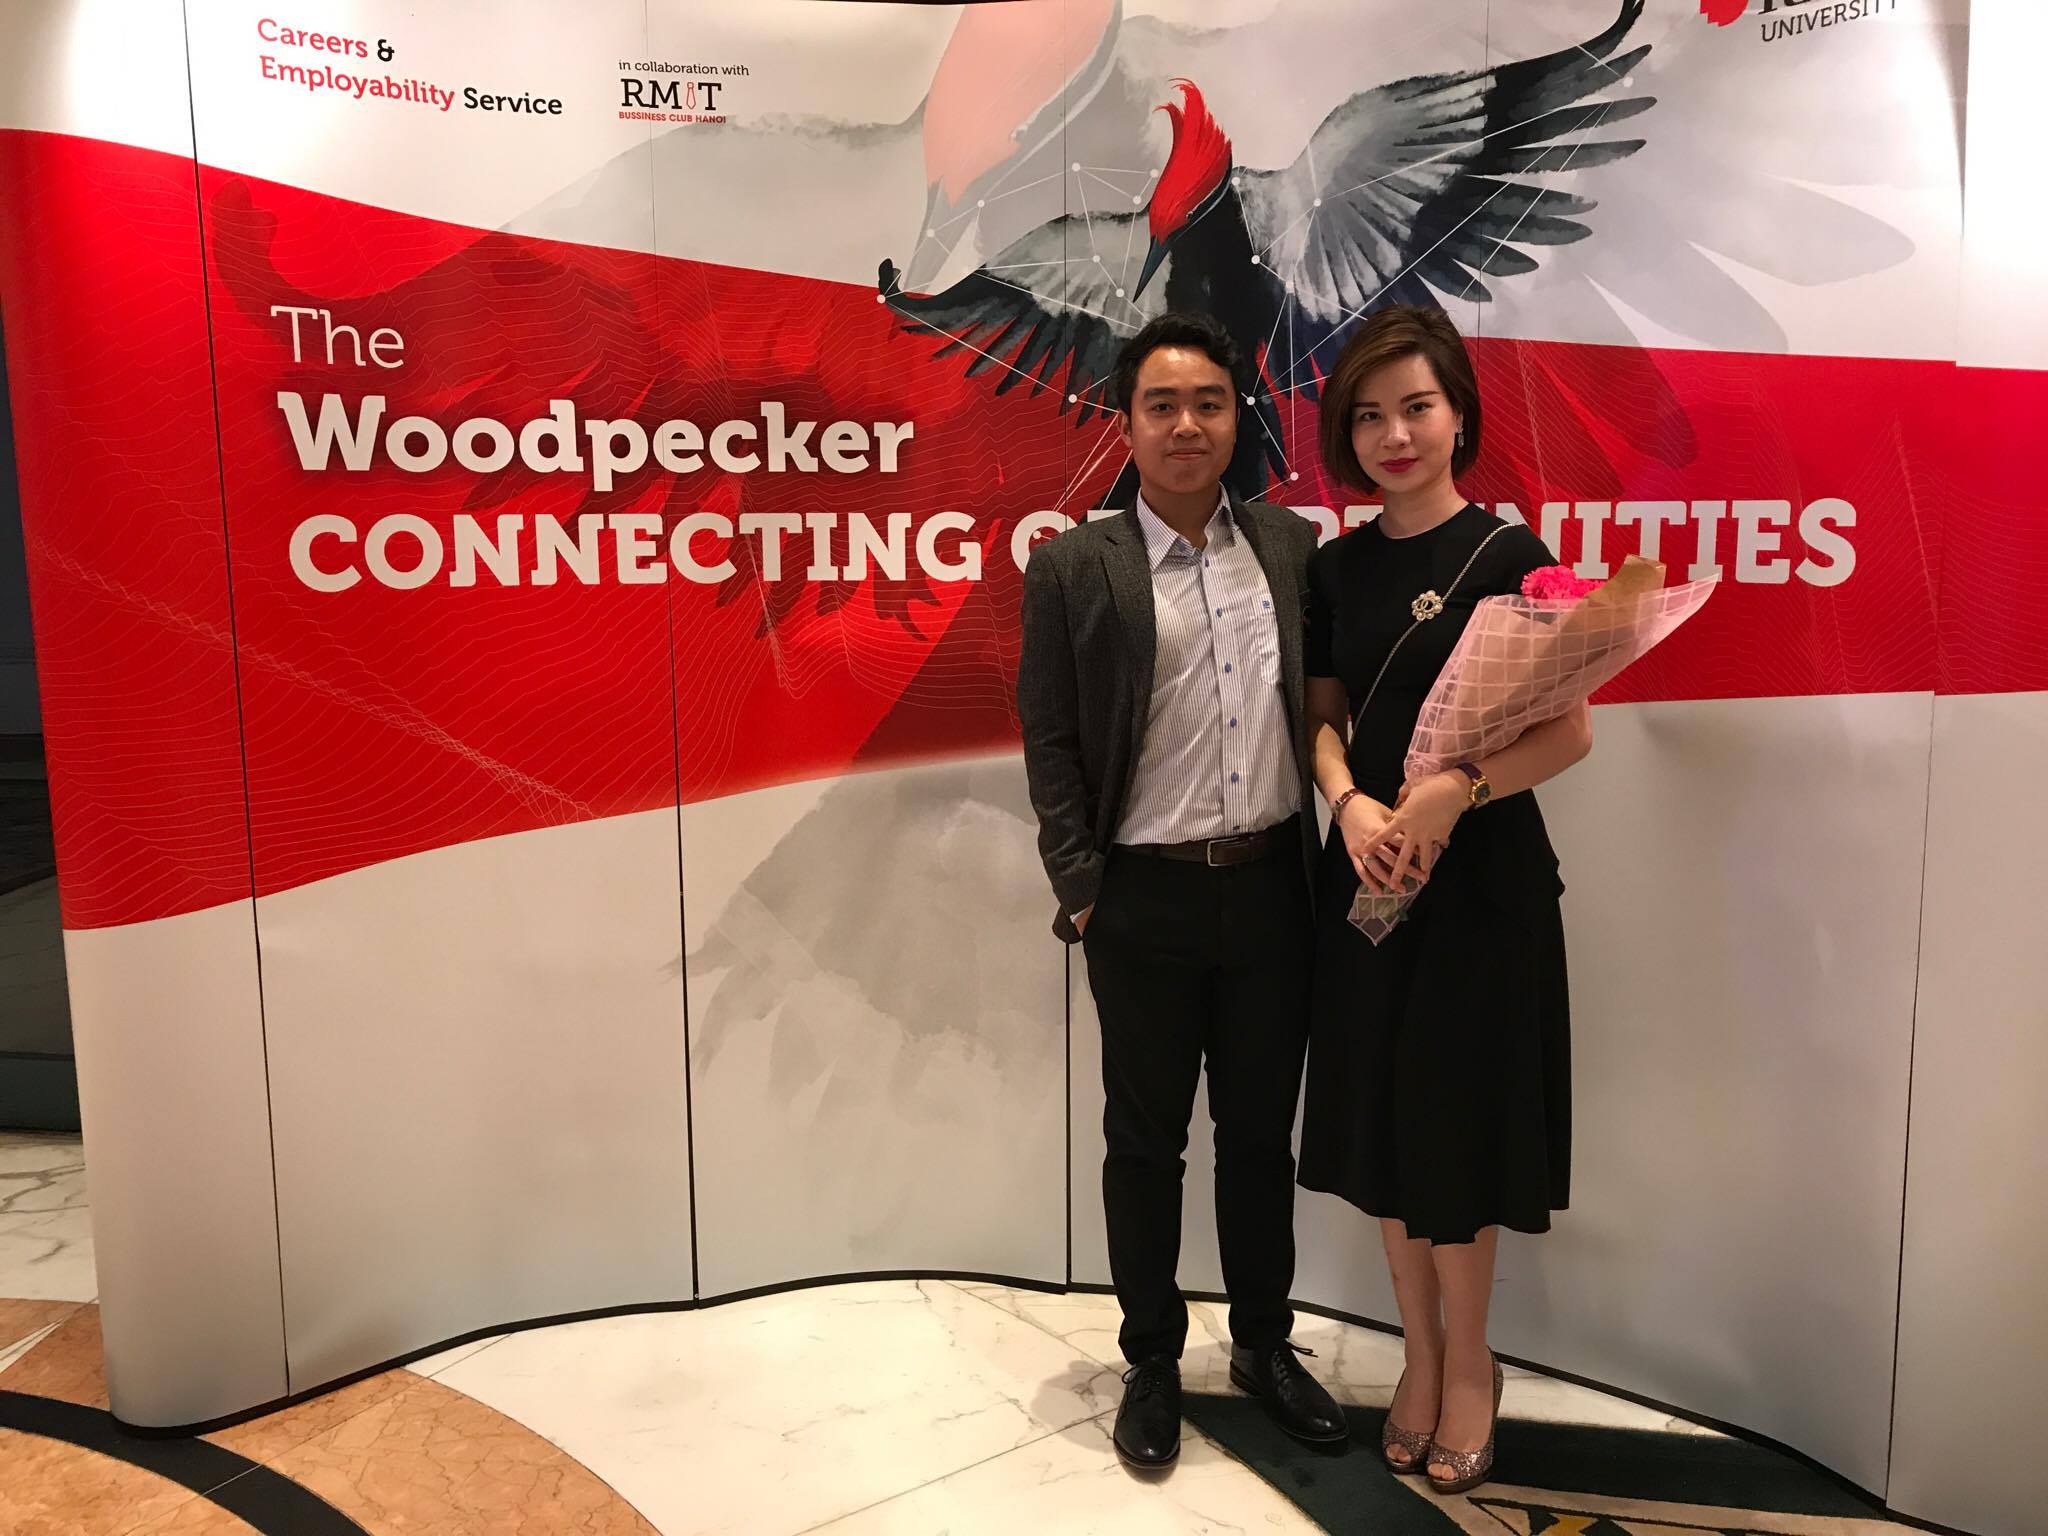 Hanoi Business Alumni Chapter President Le Thanh Thuy (right) and Vice President Hoang Manh Linh attend the launch event at Daewoo Hotel.